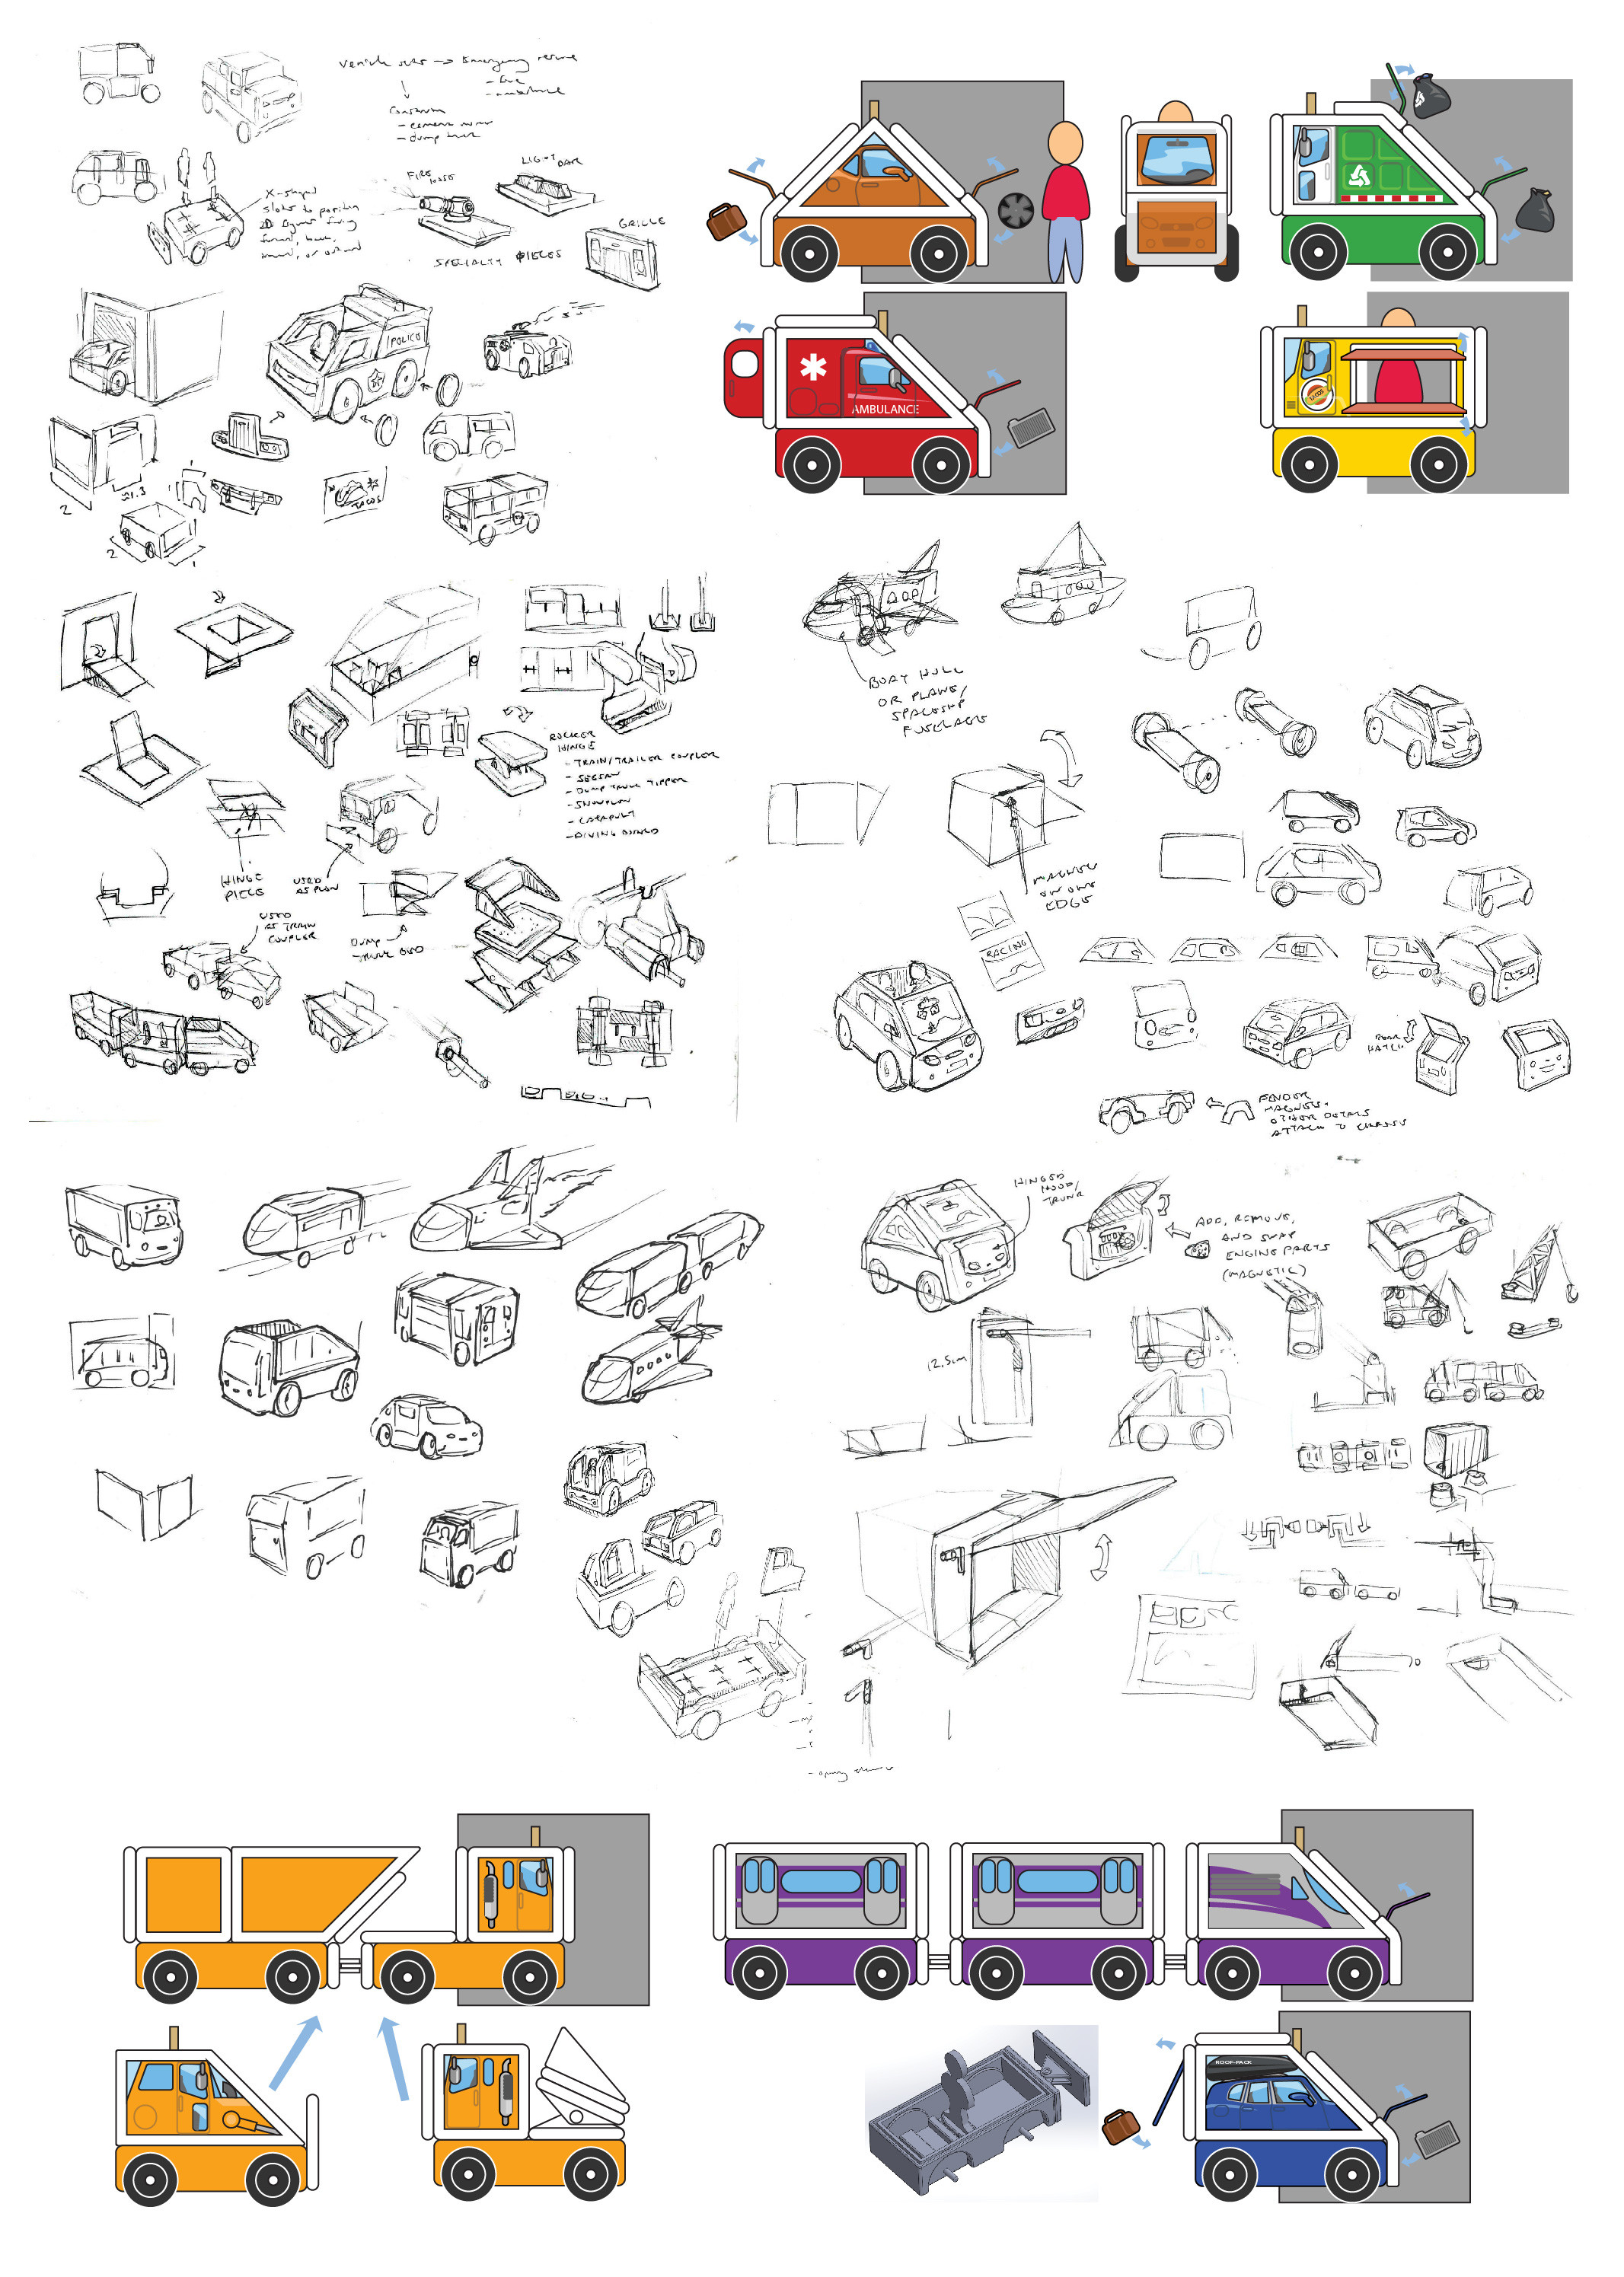 Initial sketches and Illustrator explorations of how to introduce vehicles into the Magnetivity system. Initially the magnetic panels themselves were intended to communicate the vehicles' forms.